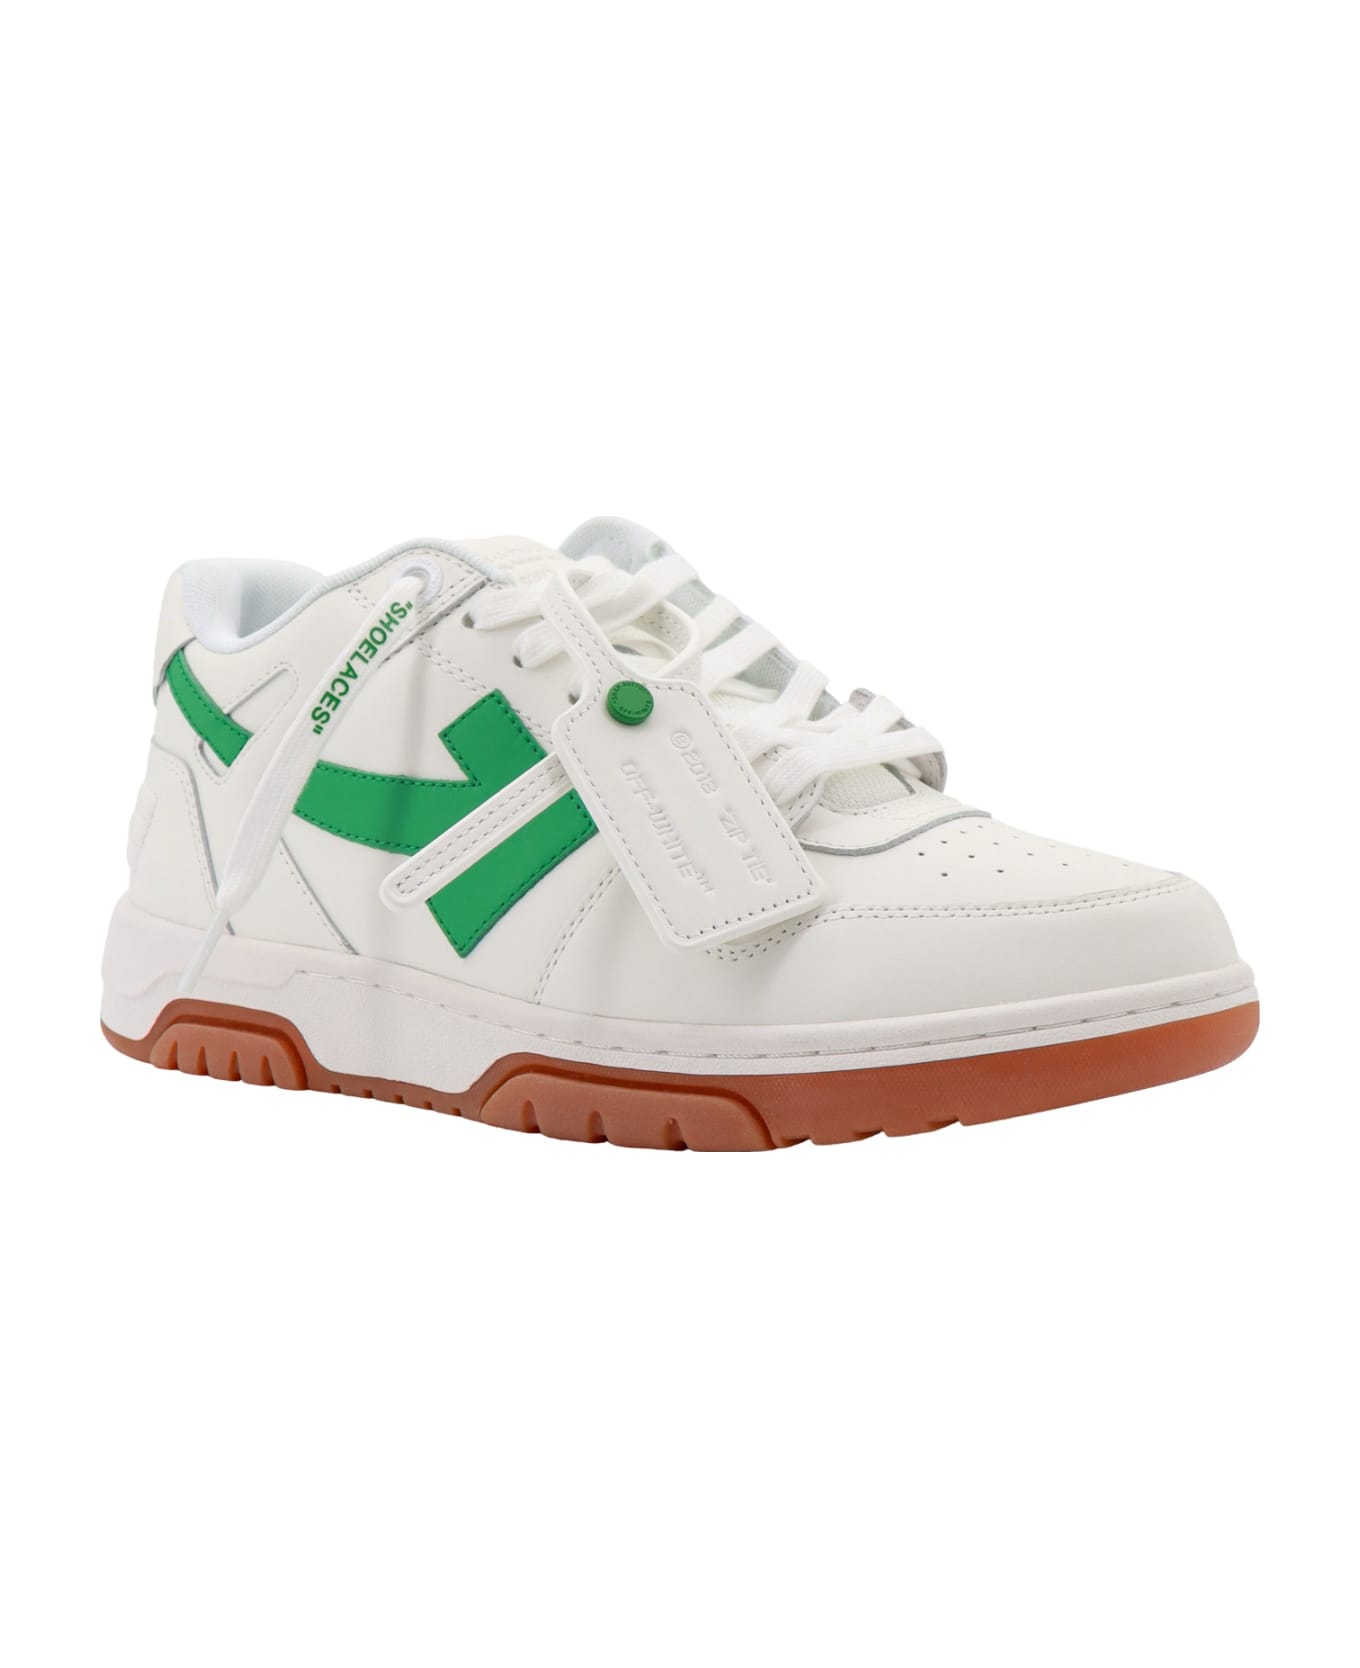 Off-White Out Of Office Lace-up Sneakers - Green